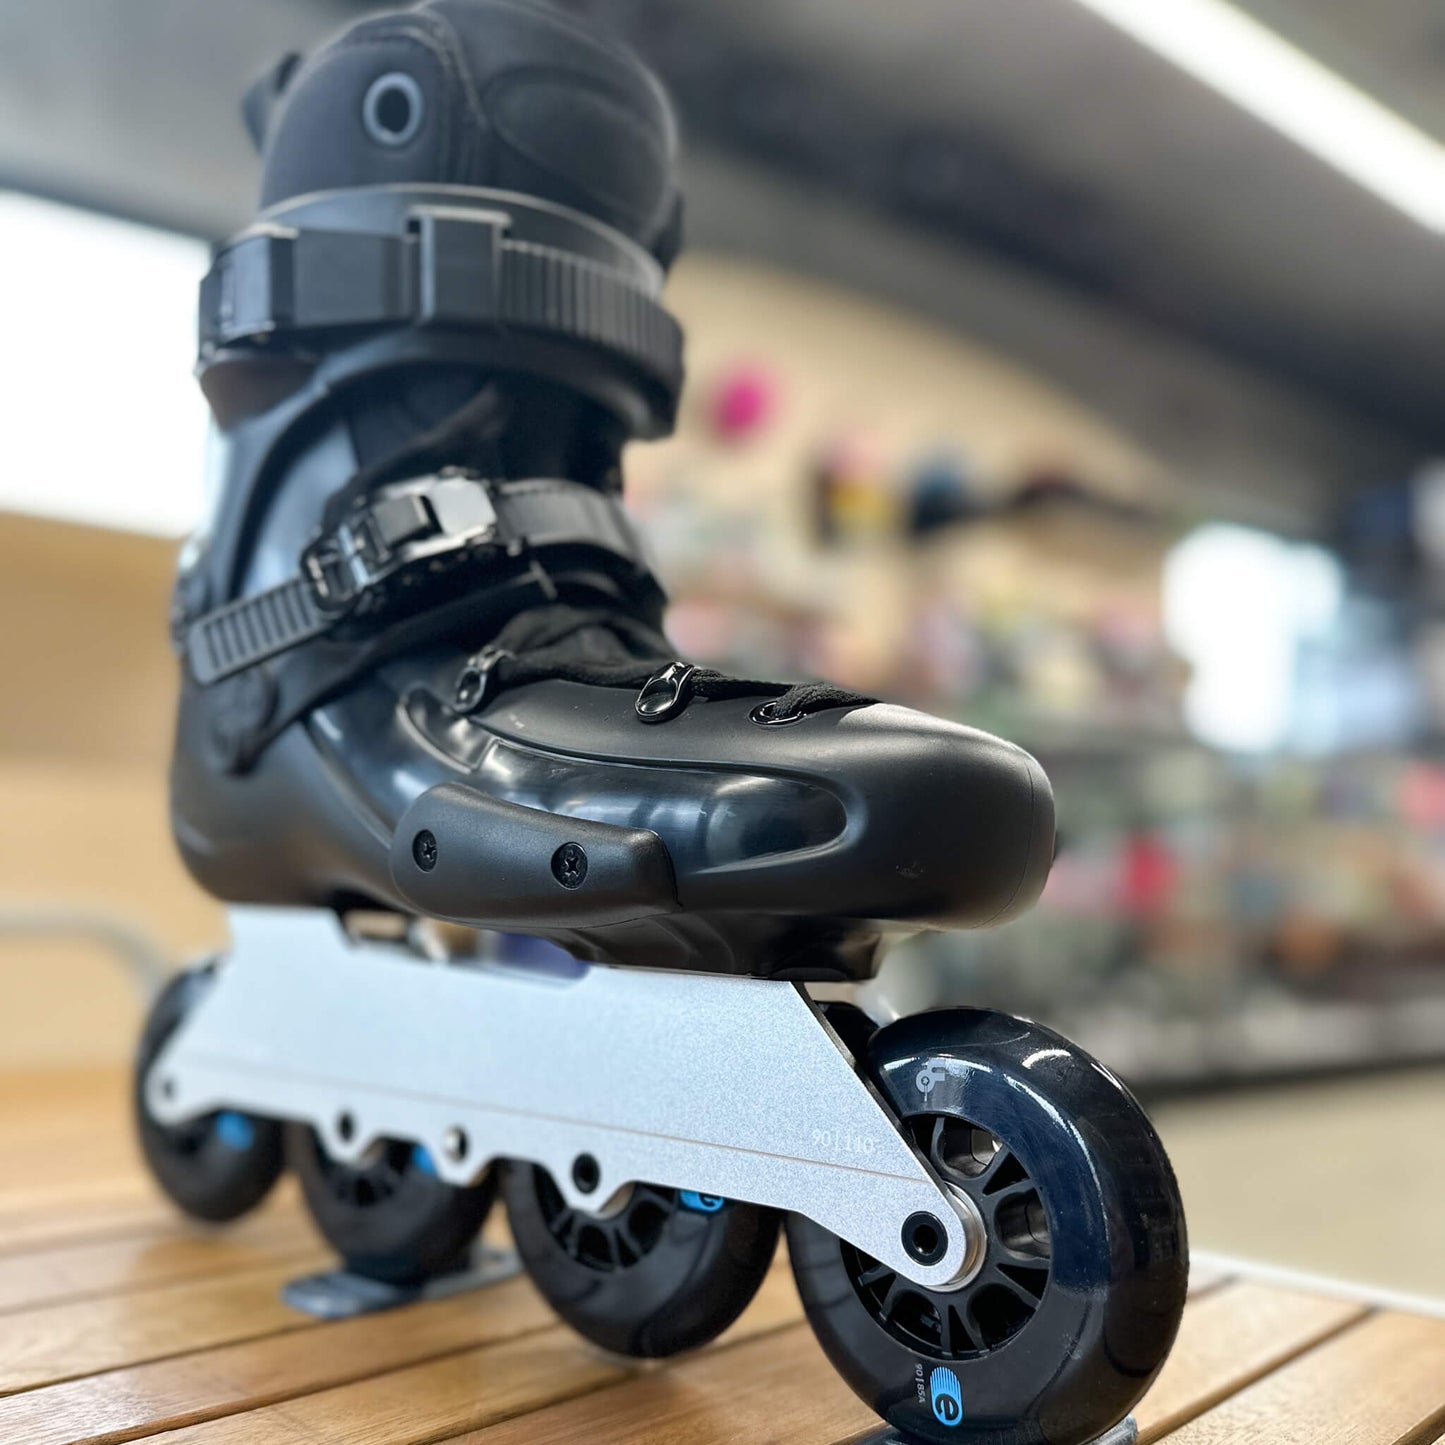 Patines Endless FR1 Intuition - Endless 90